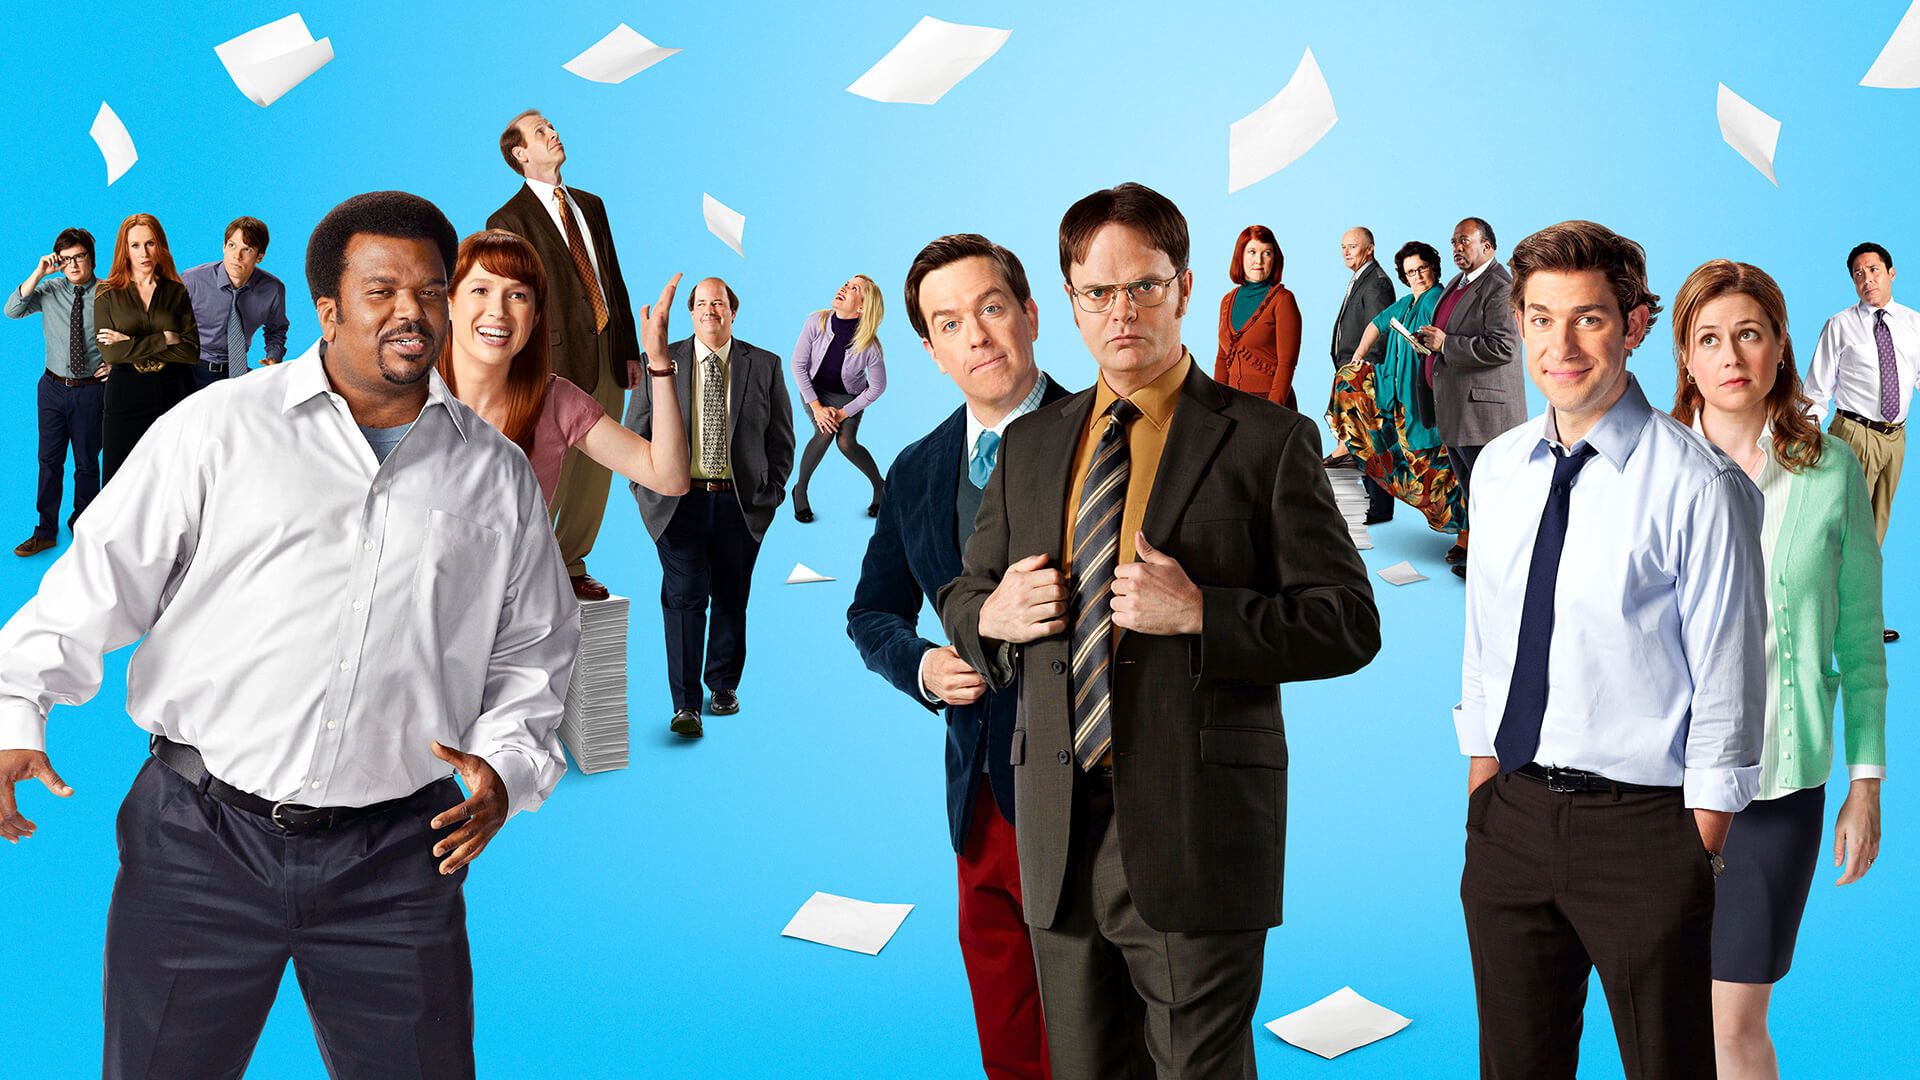 The Office TV Show Wallpaper 68632 1920x1080px